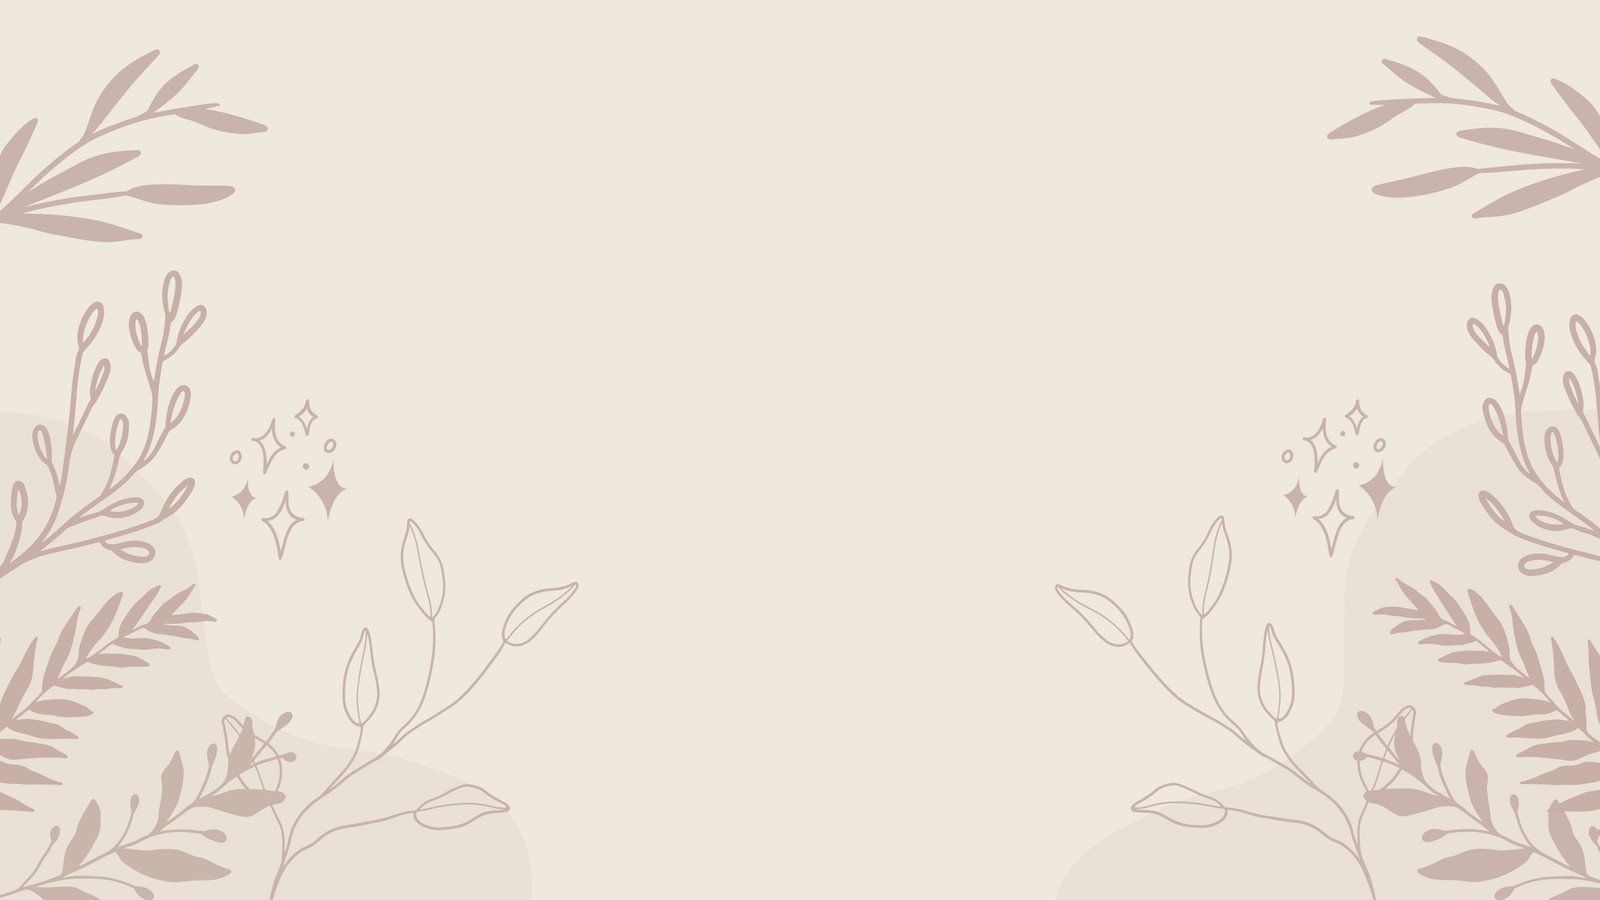 A beige background with some leaves and branches - Pattern